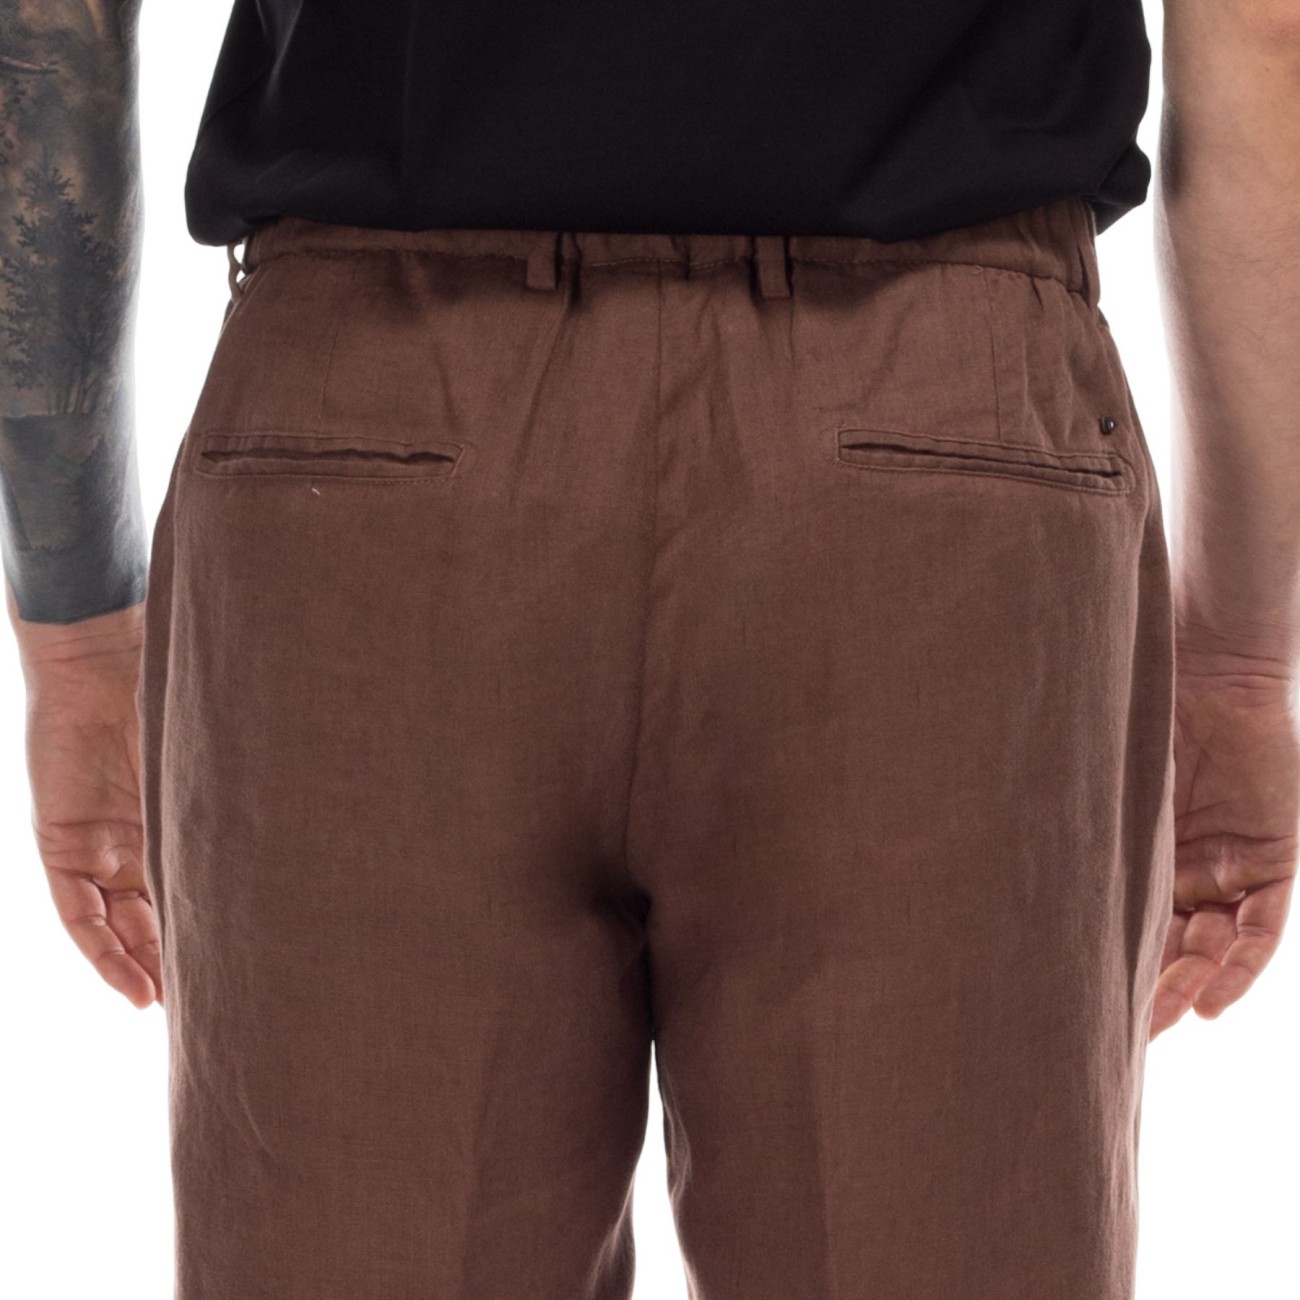 Brown linen pant outfit